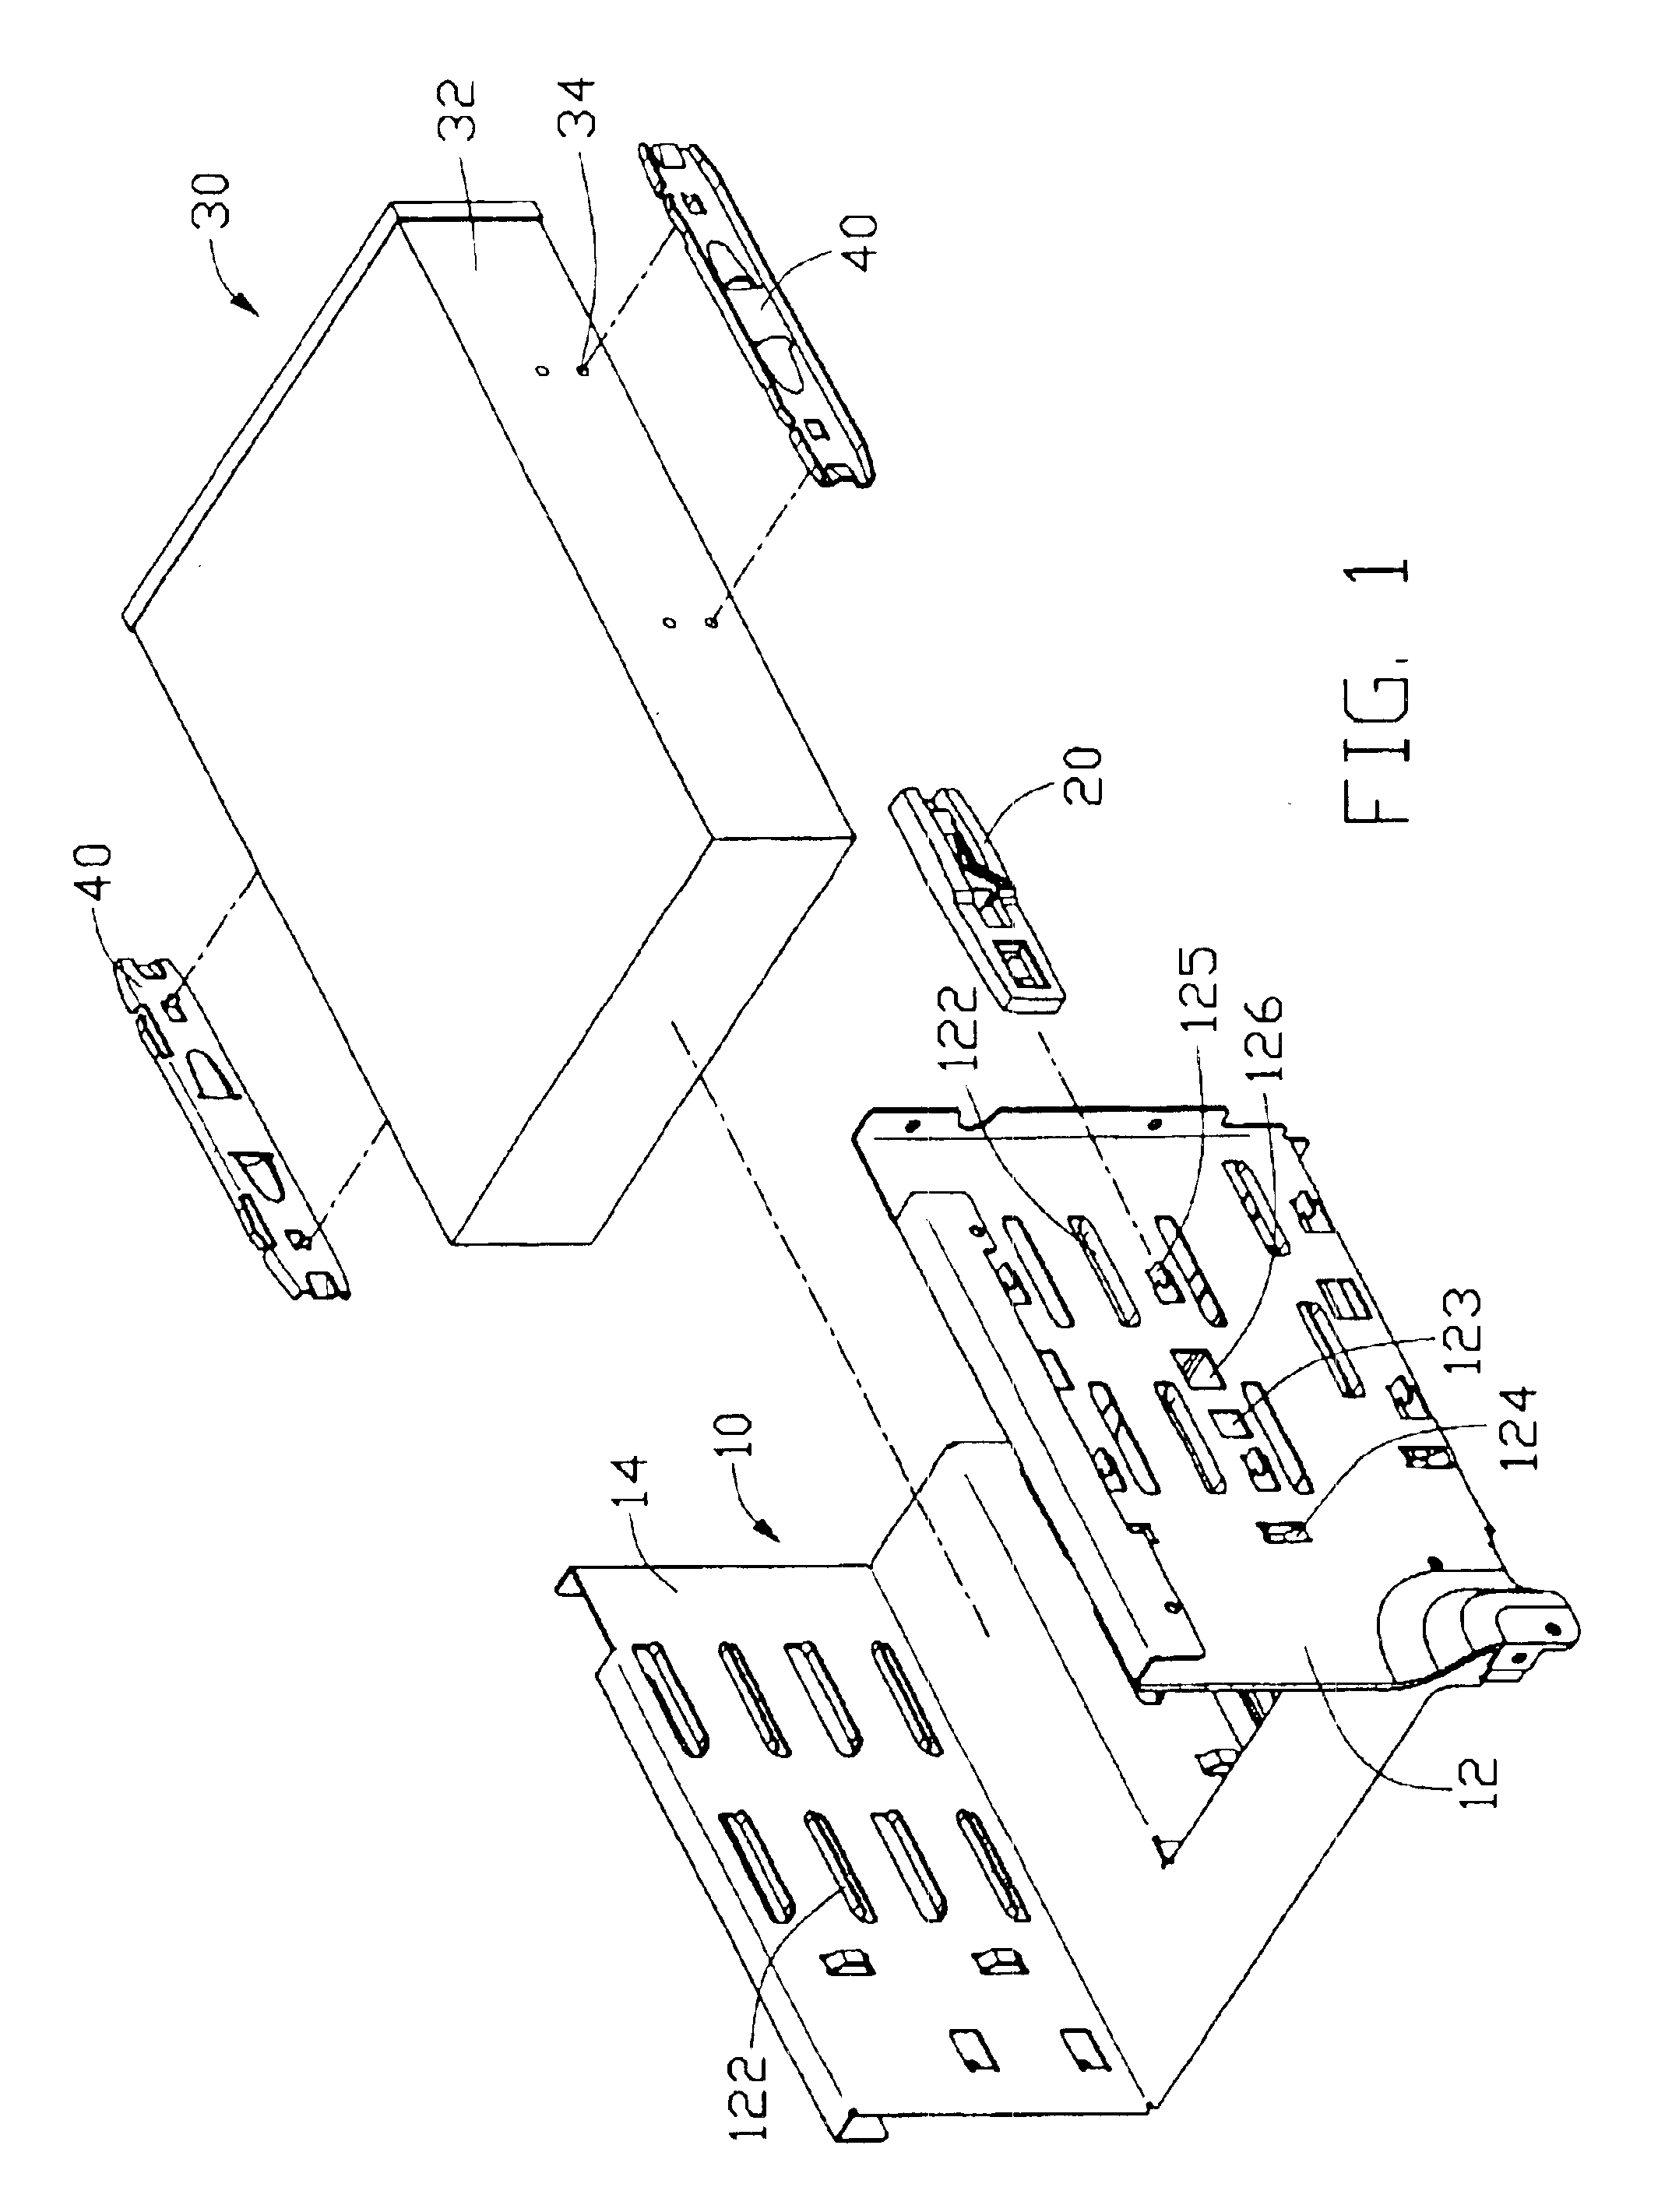 Mounting apparatus for data storage devices